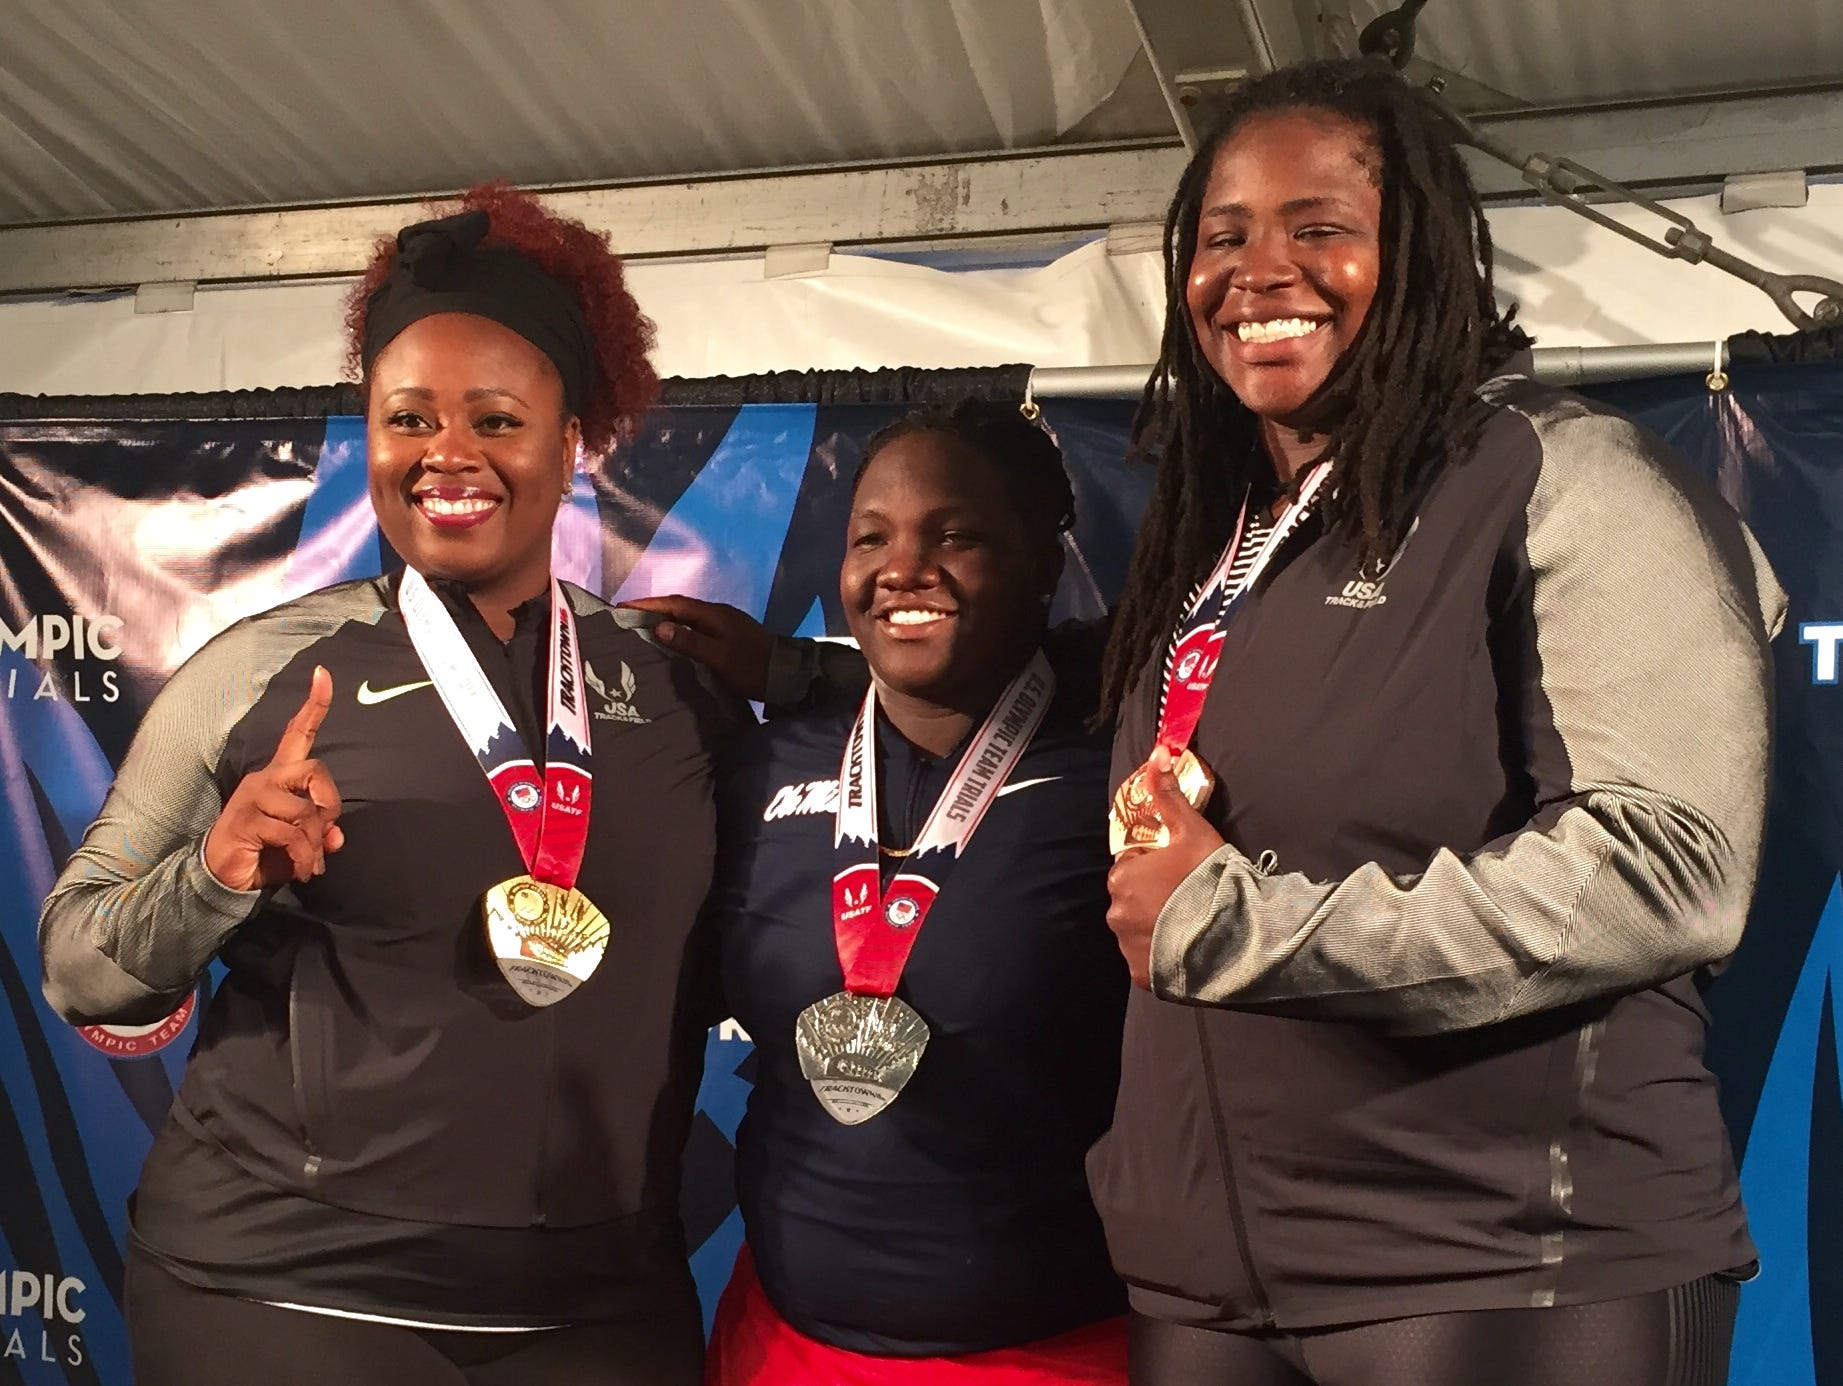 Felisha Johnson made the Olympic team with winner Michelle Carter, left, and Raven Saunders.